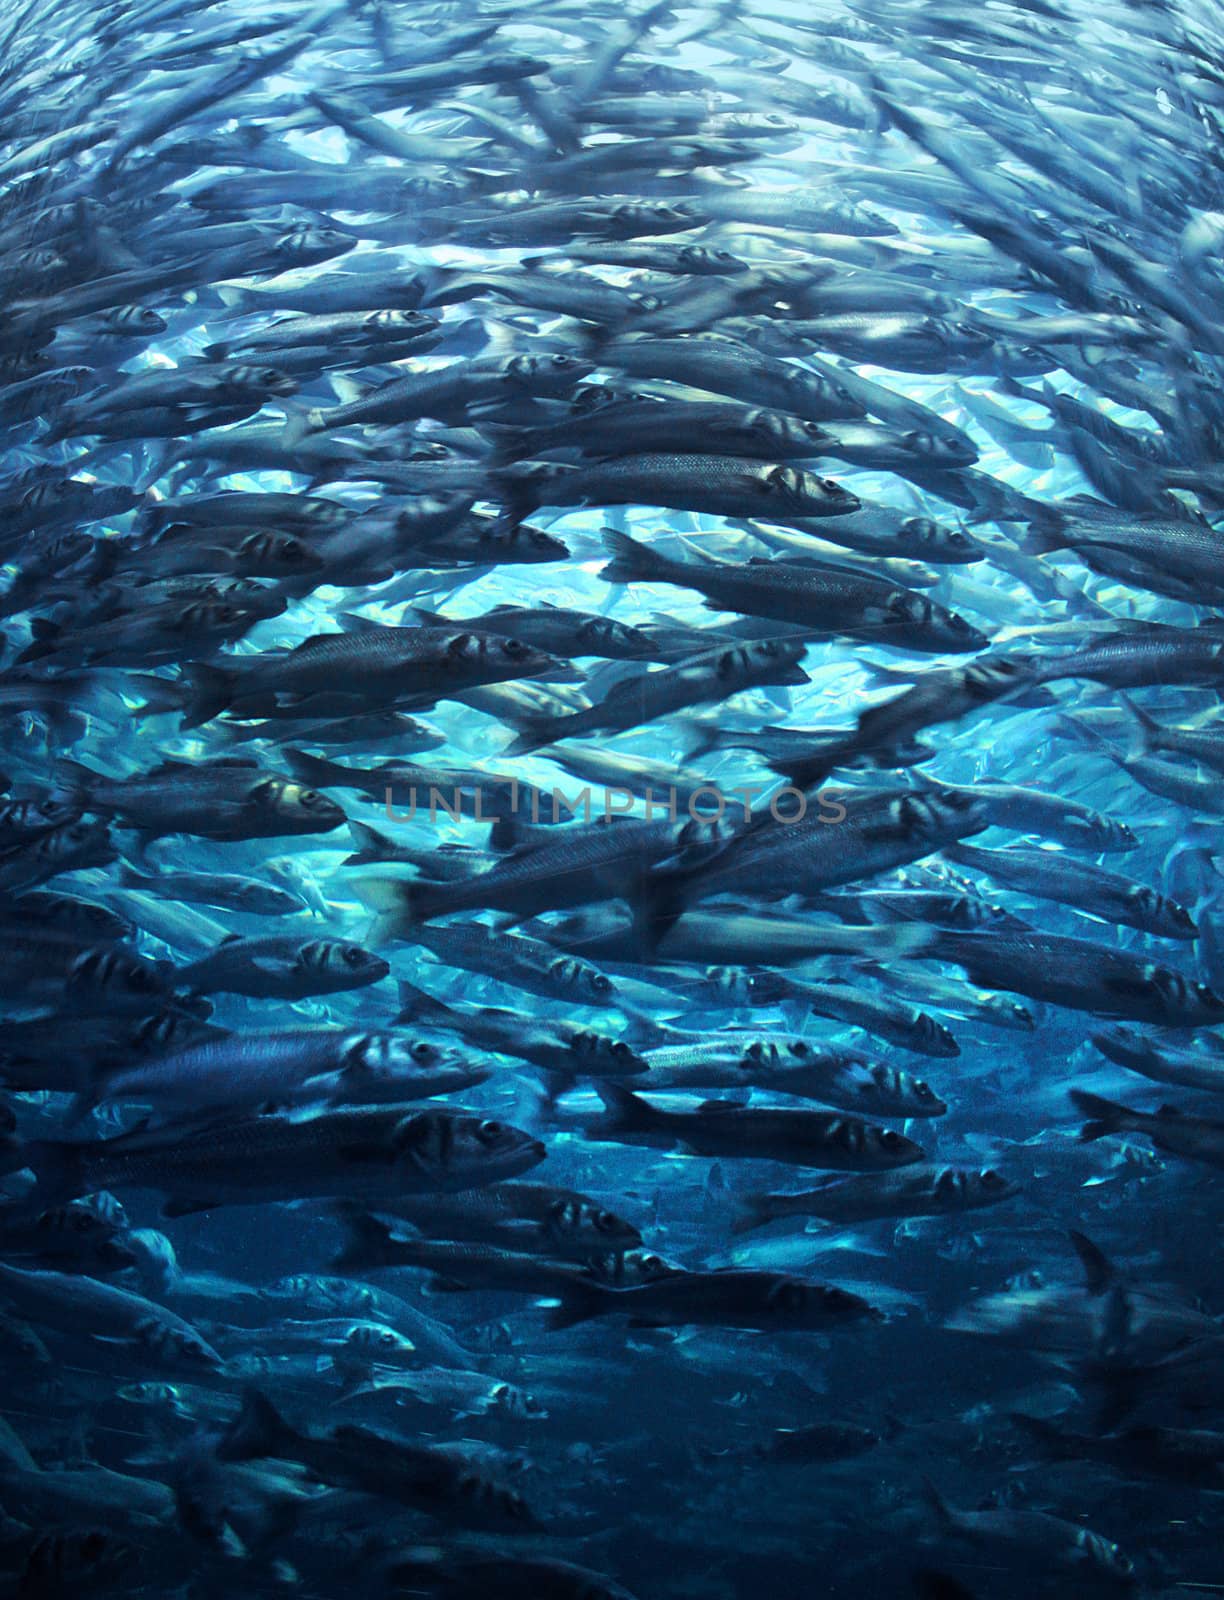 Crowded fish shoal by anterovium